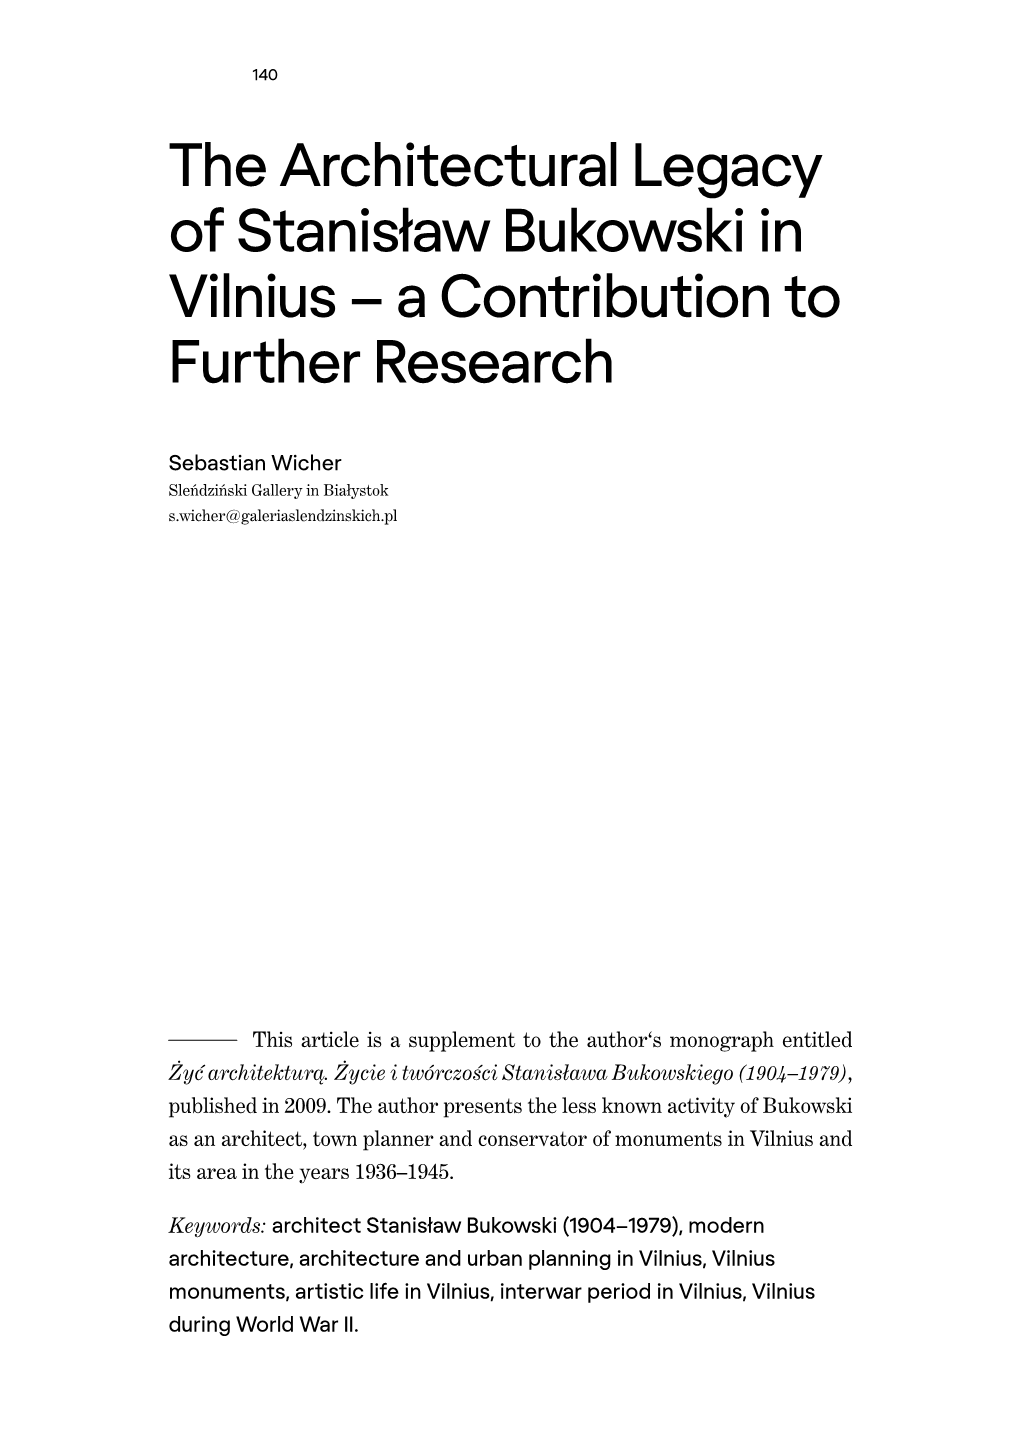 The Architectural Legacy of Stanisław Bukowski in Vilnius – a Contribution to Further Research